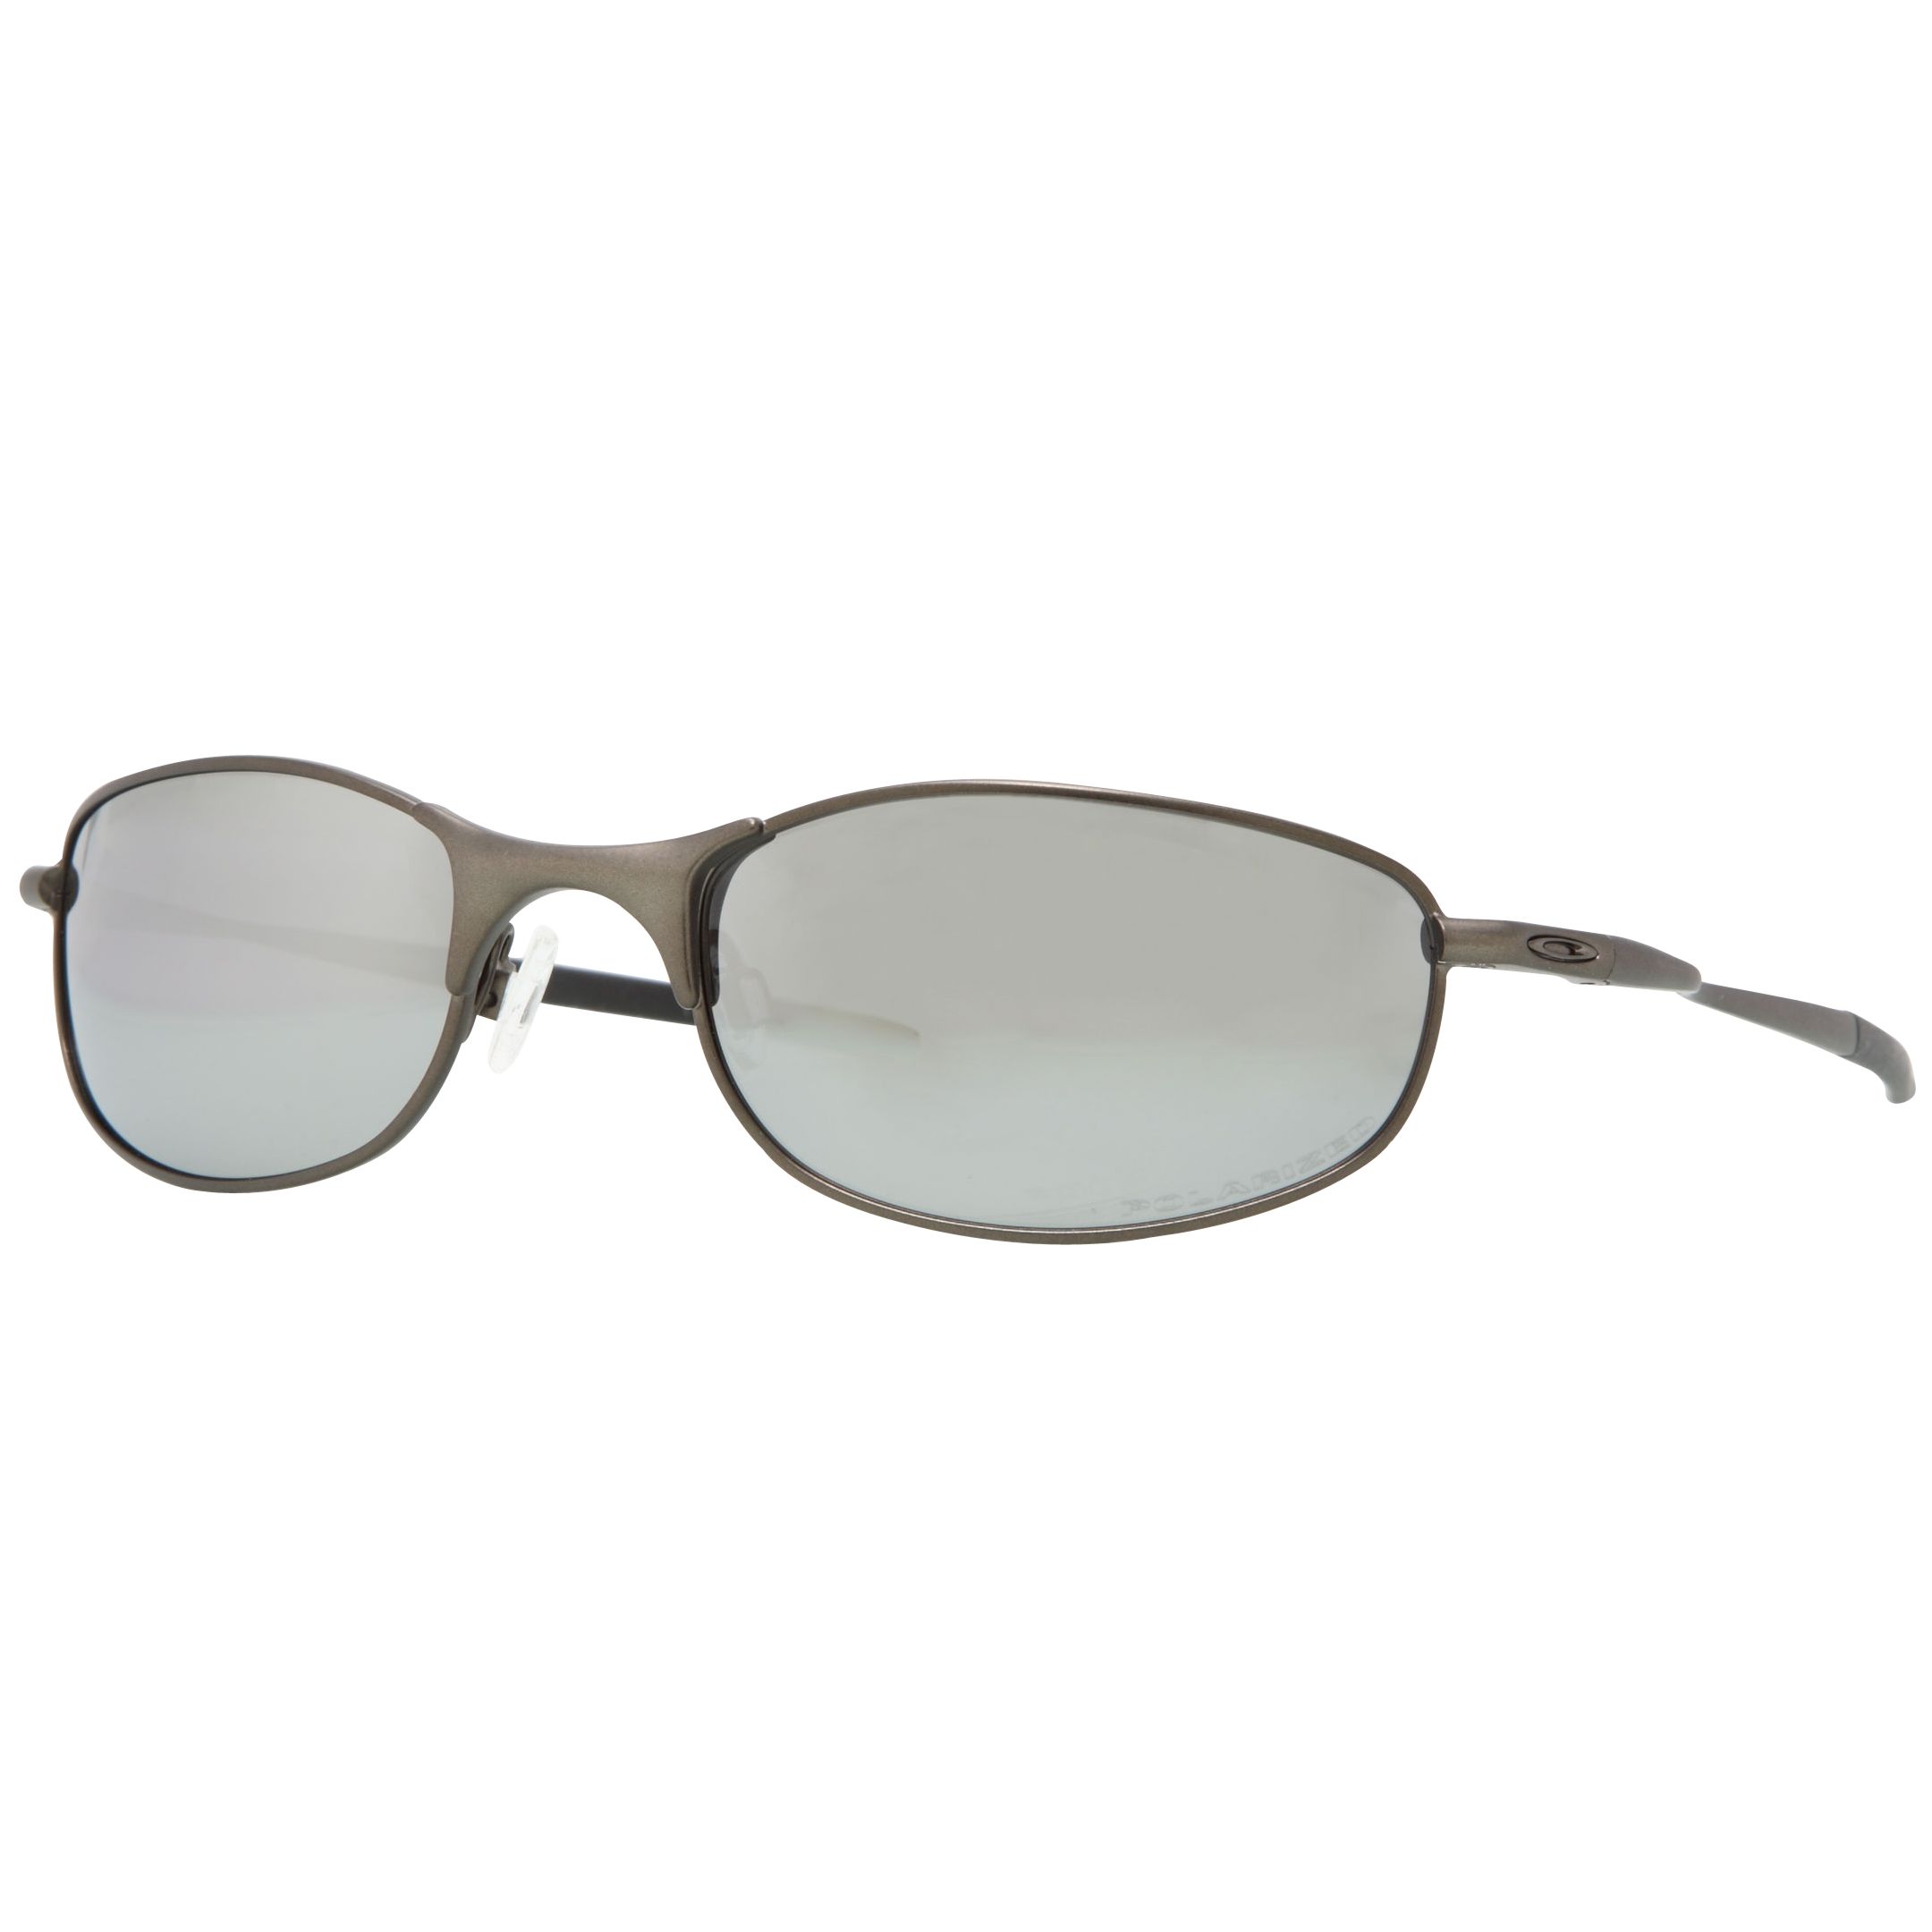 Oakley Men's Tightrope Small Oval Metal Sunglasses, Pewter at John Lewis